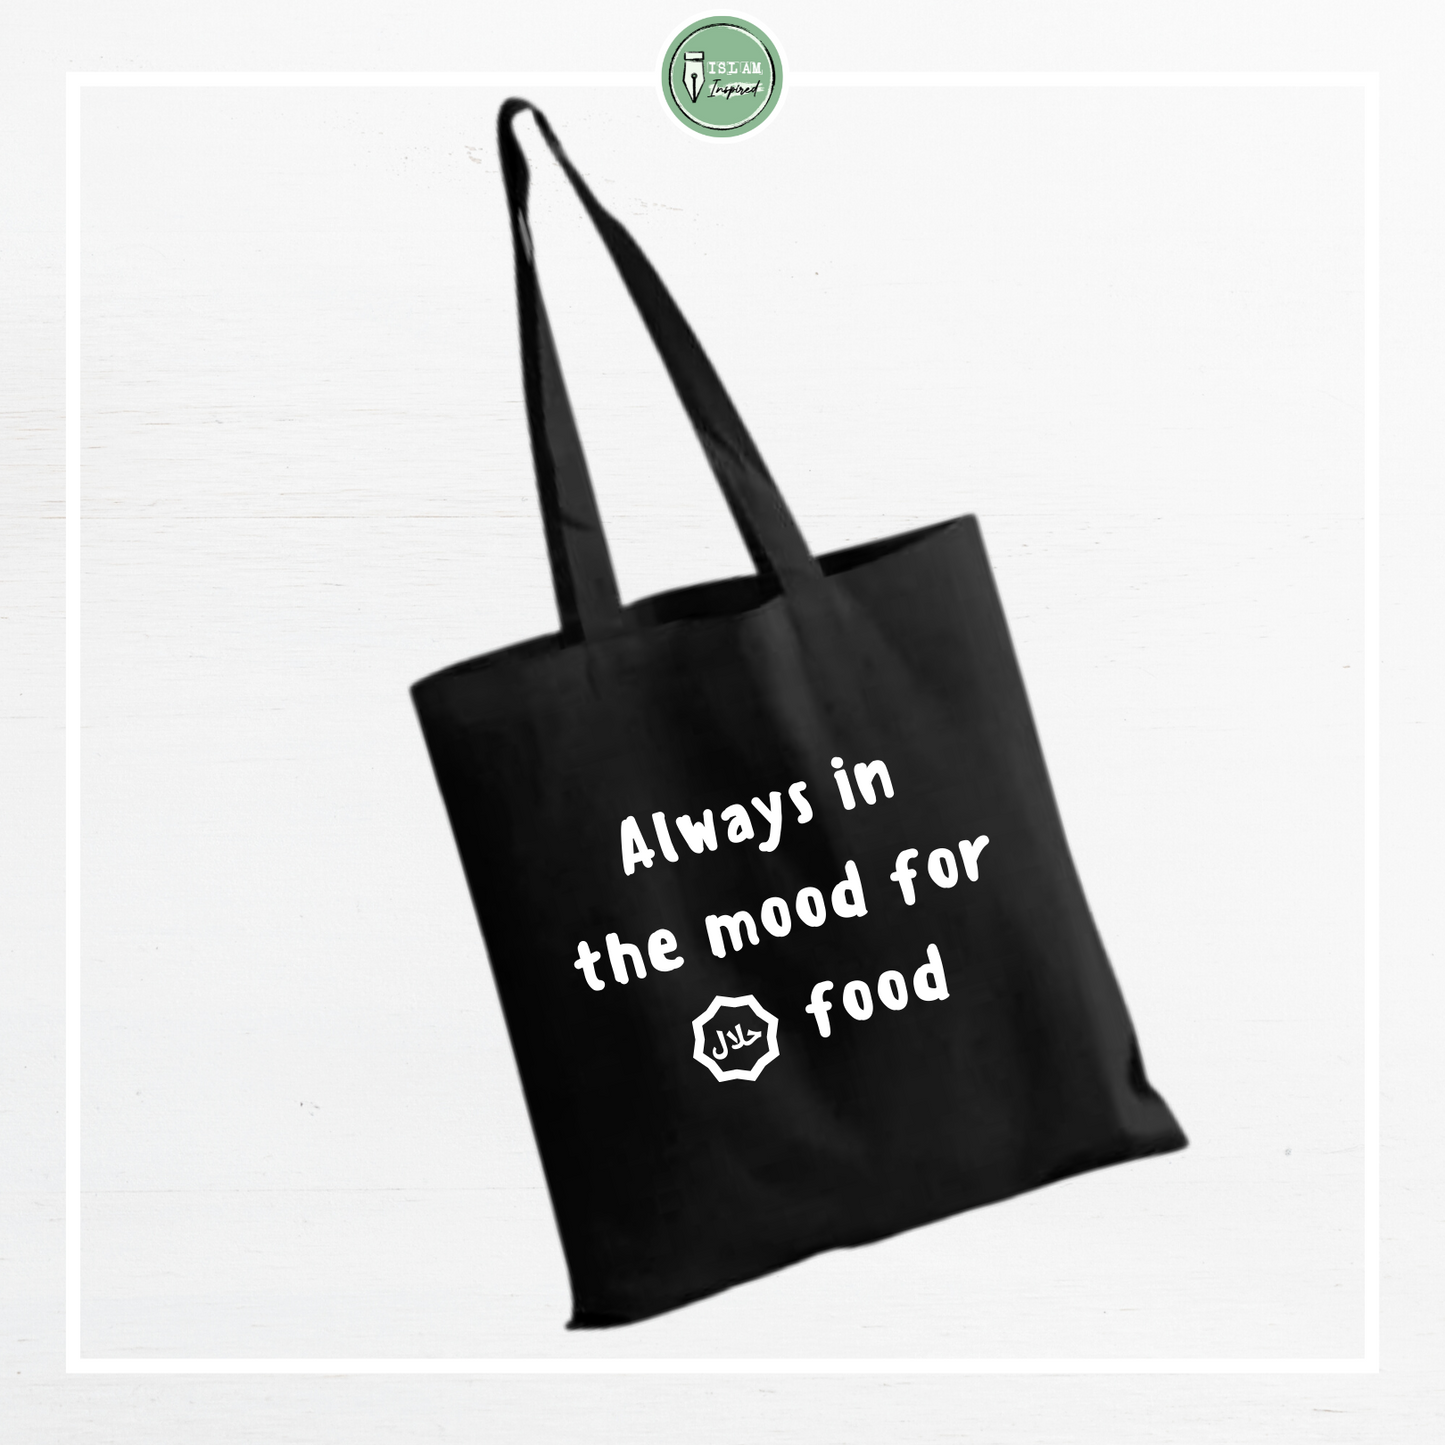 Totebag 'Always in the mood for Halal food'